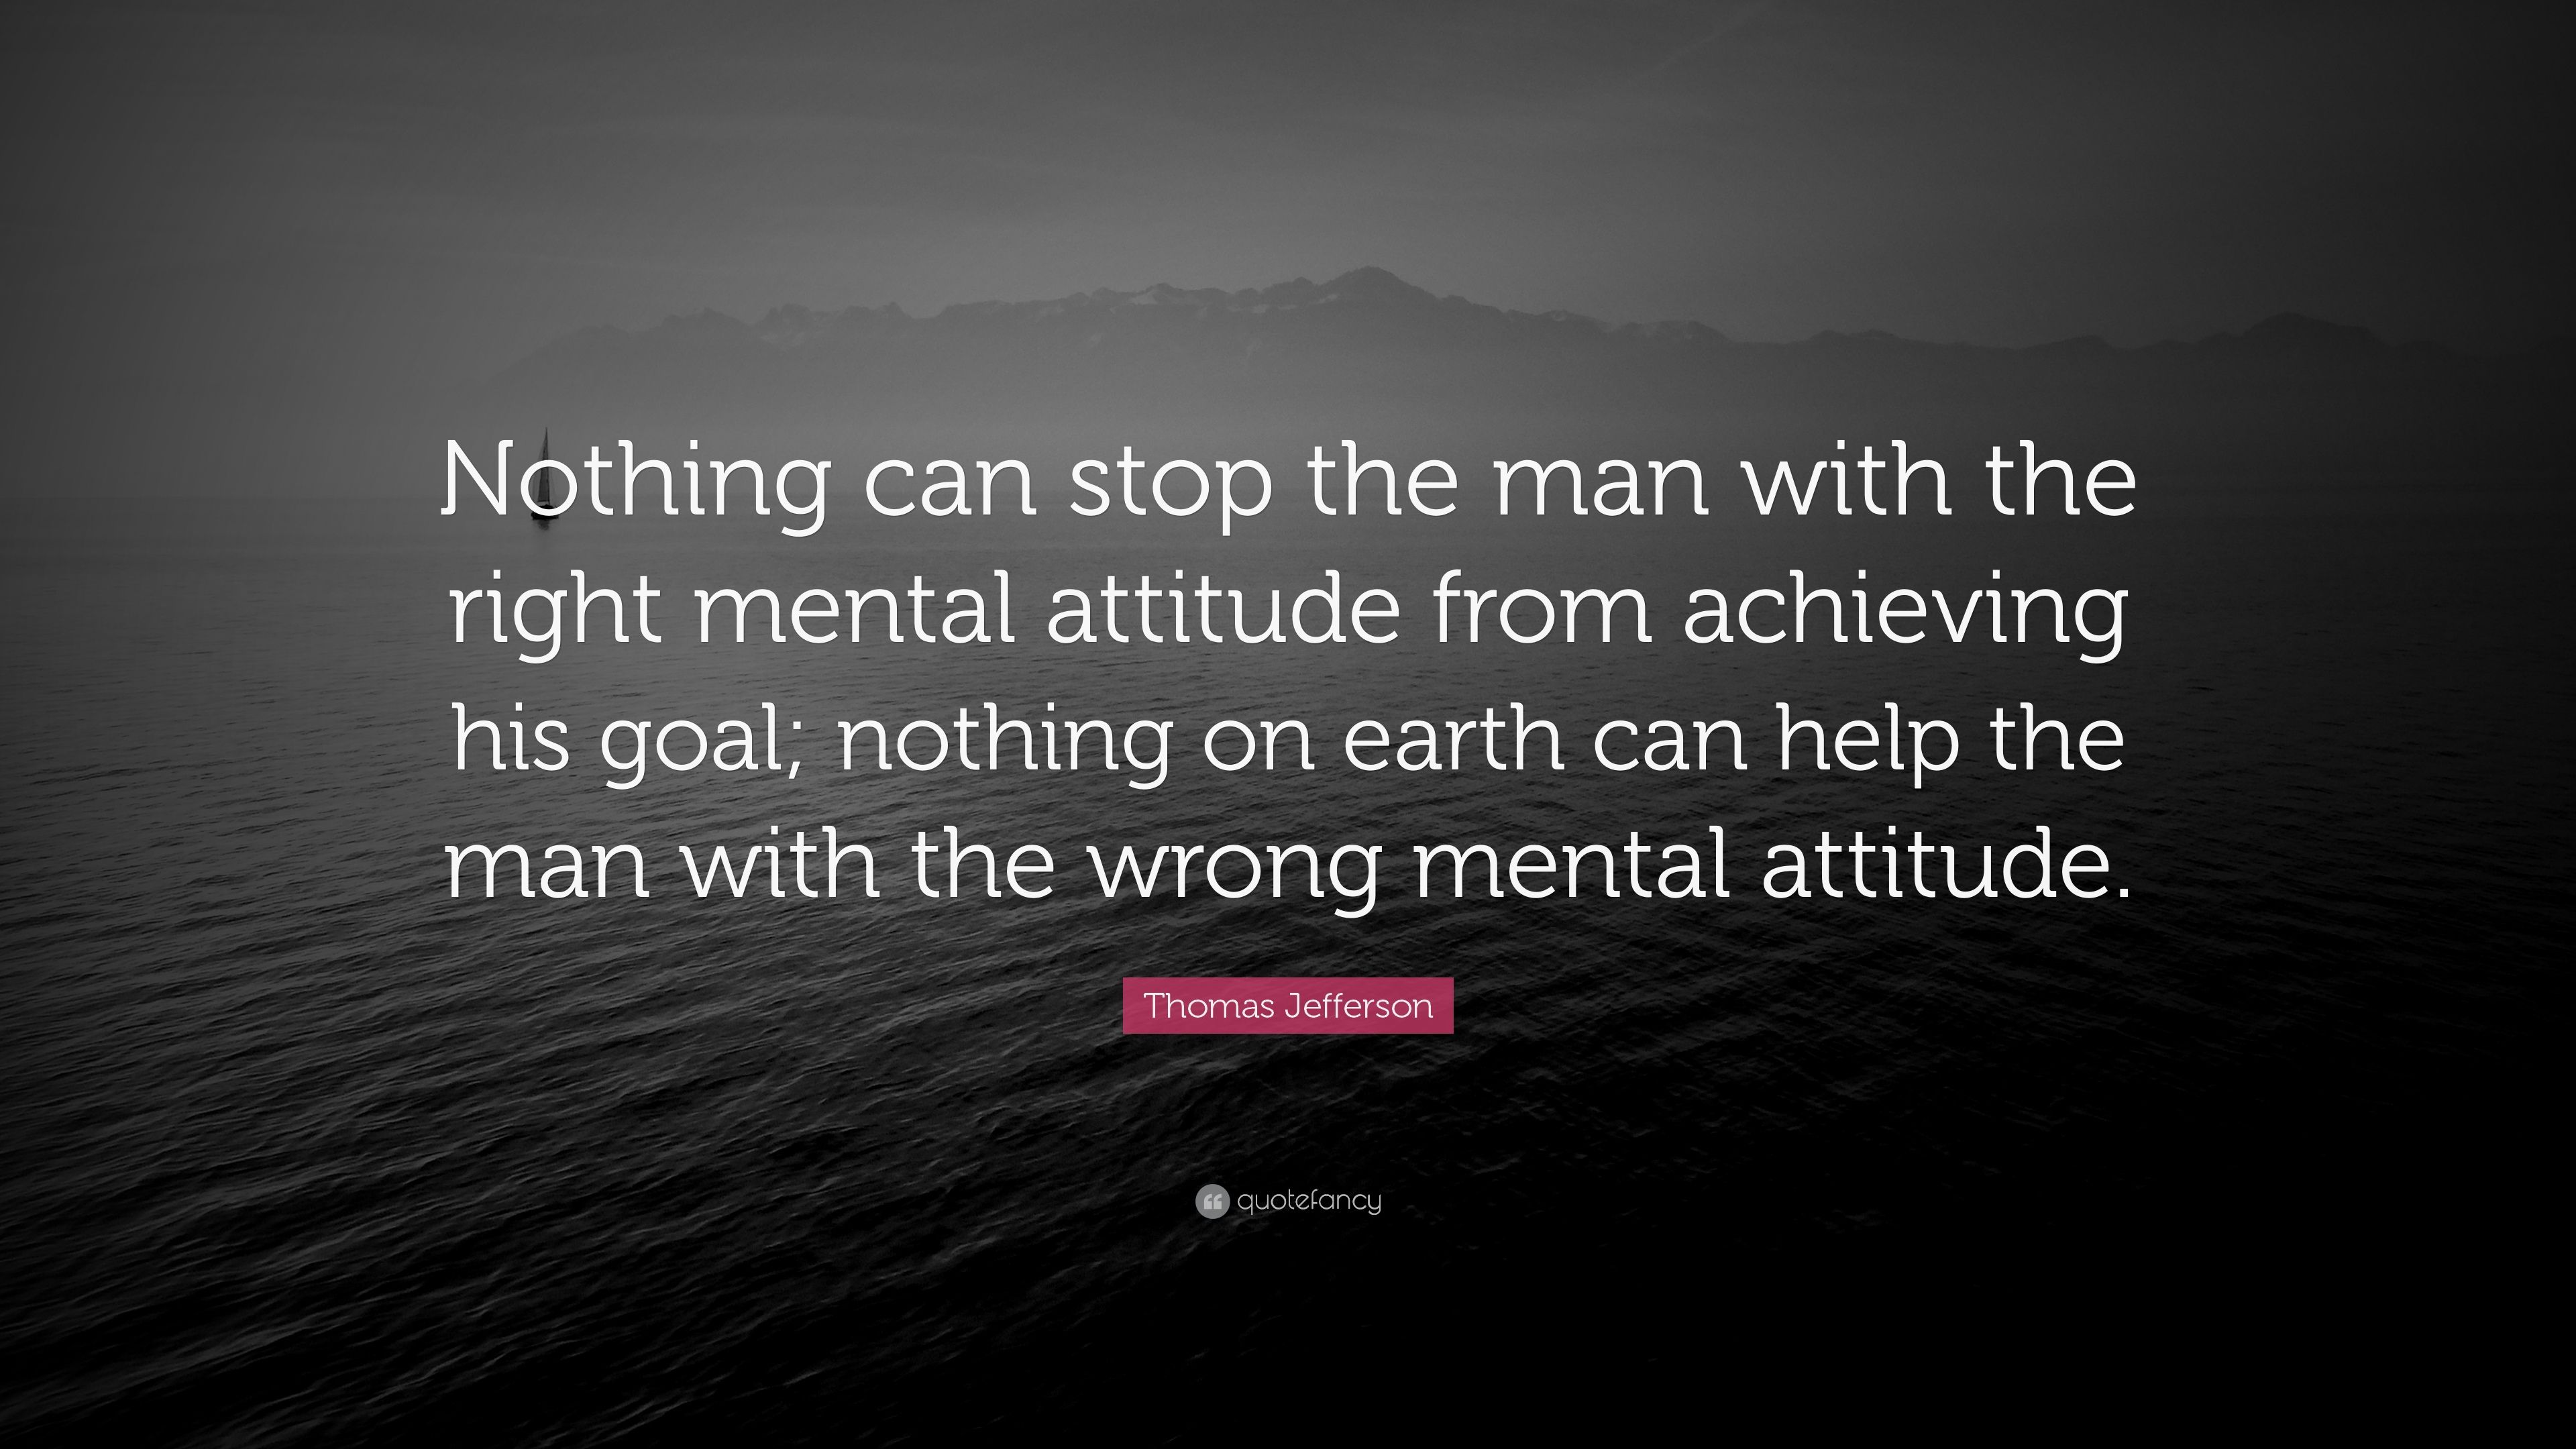 Thomas Jefferson Quote: “Nothing can stop the man with the right mental attitude from achieving his goal; nothing on earth can help the man” (17 wallpaper)